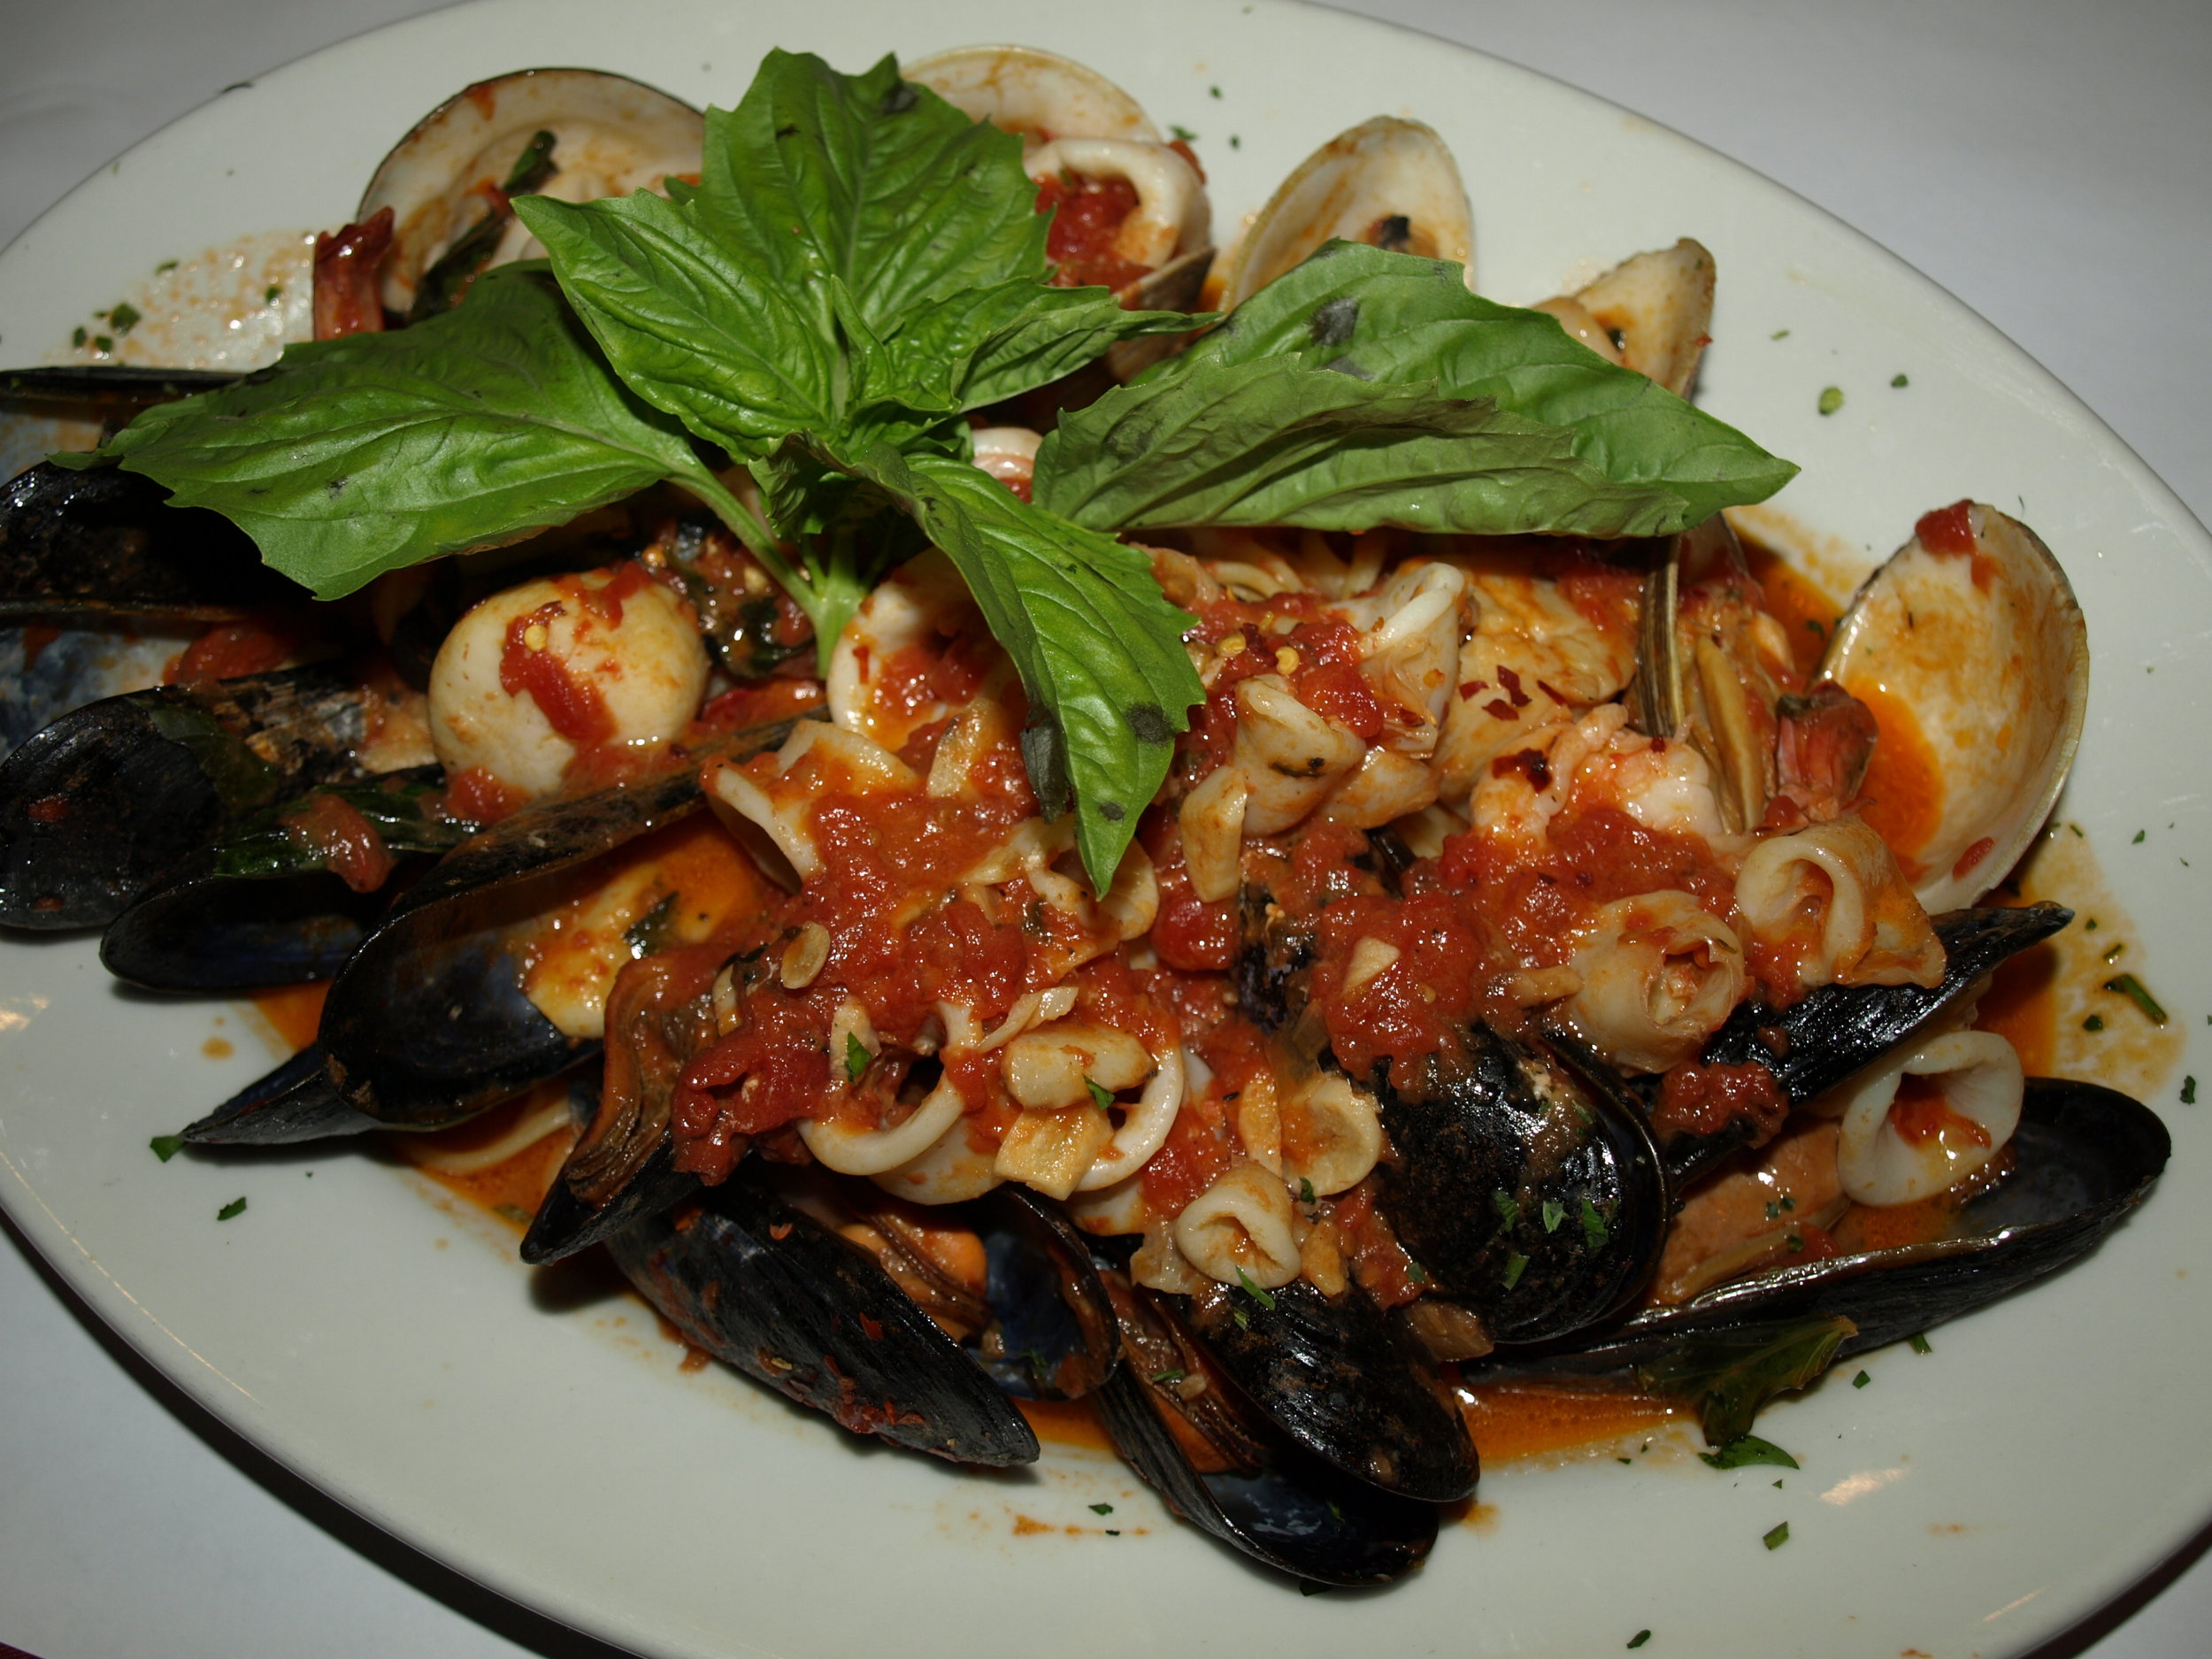   Seafood Fra Diavolo ($26.95) features a heaping platter of shrimp, mussels, clams, calamari and scallops sautéed in a spicy fra diavolo sauce on top of linguine.   Long Islander News Photo/Connor Beach  